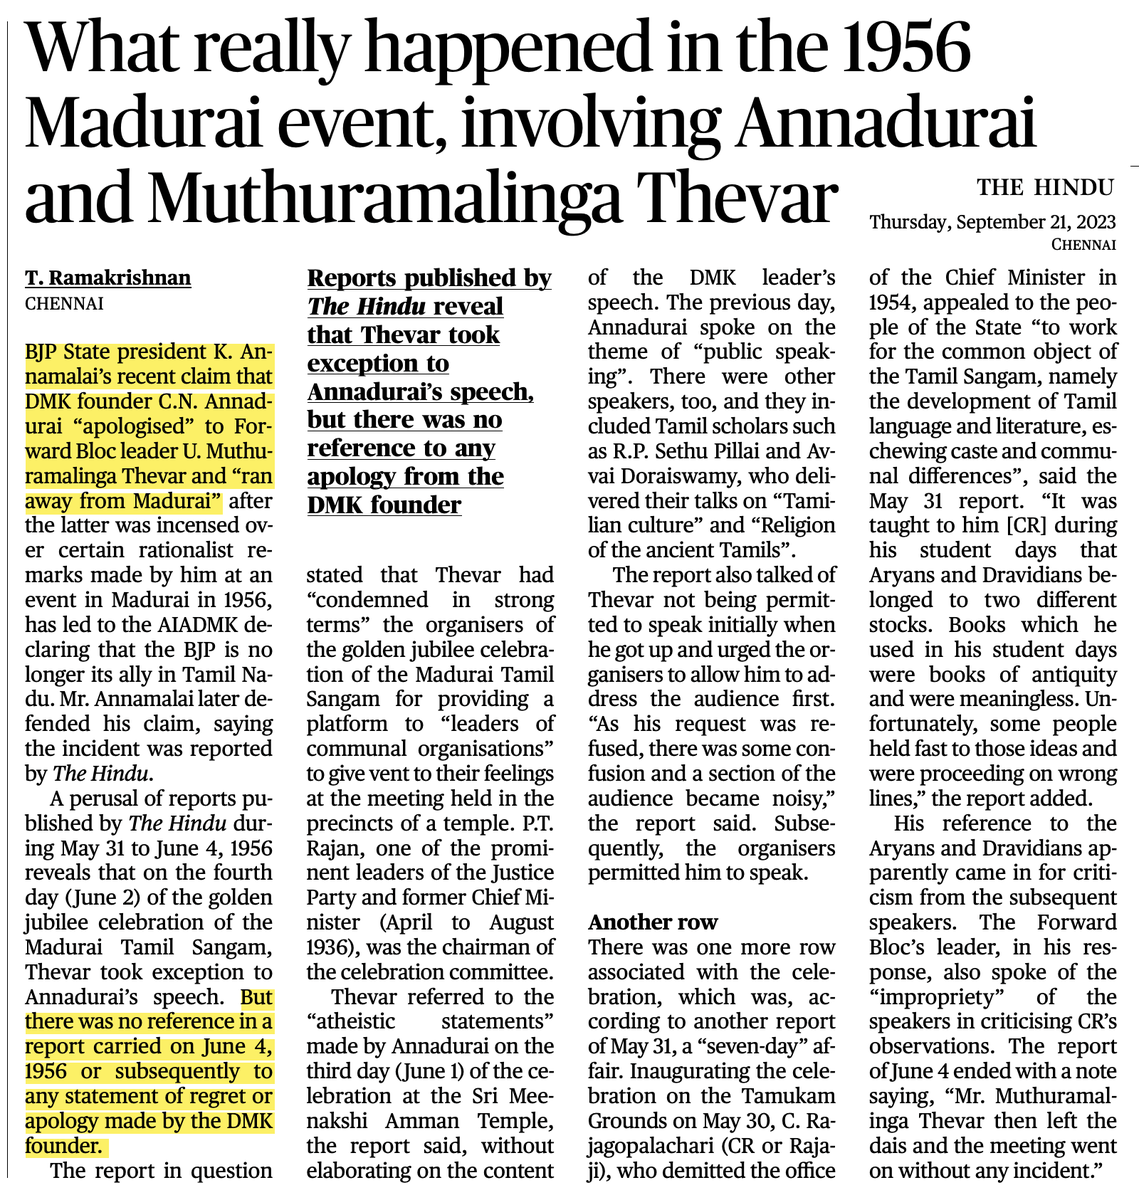 Pic 1: A report in Deccan Chronicle that repeats the entire content twice (the highlighted portion is verbatim repeat), making it look like a bigger news than what it is.

Pic 2: The truth of who filed the case.

Pic 3: 
Annamalai: 'DMK founder C.N. Annadurai “apologised” to…